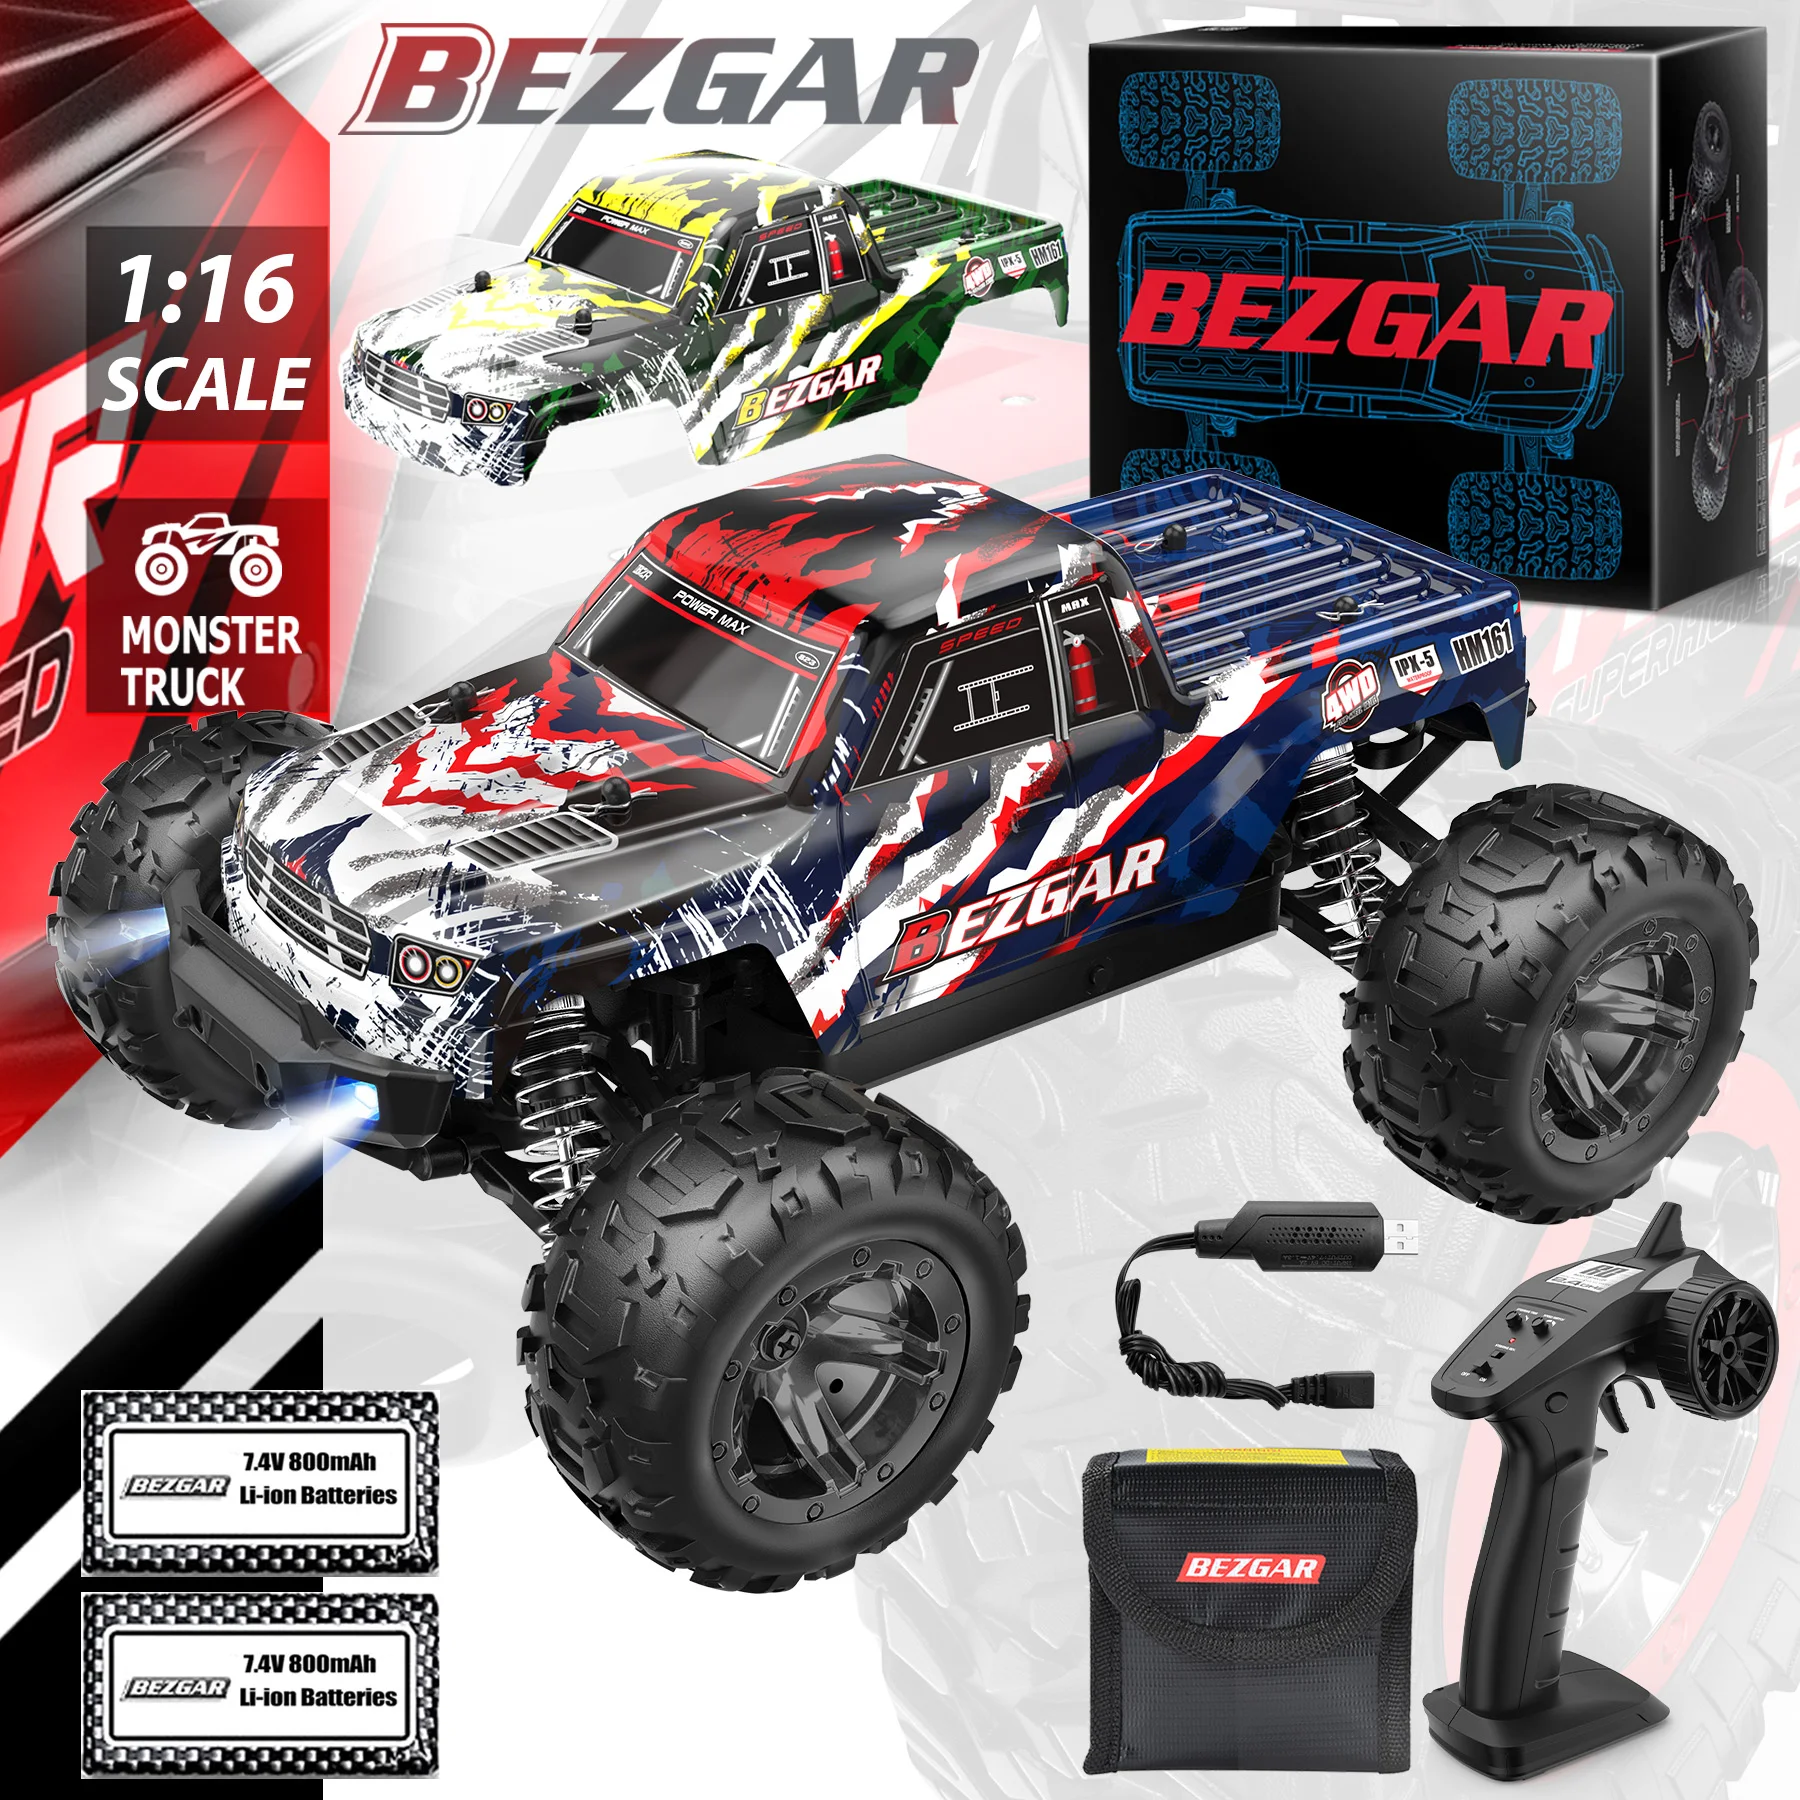 BEZGAR Hobby Buggy RC Car Truck  All-Terrain 40Km/h Off-Road 4WD Remote Control Monster Crawler with Battery for Kids Adults